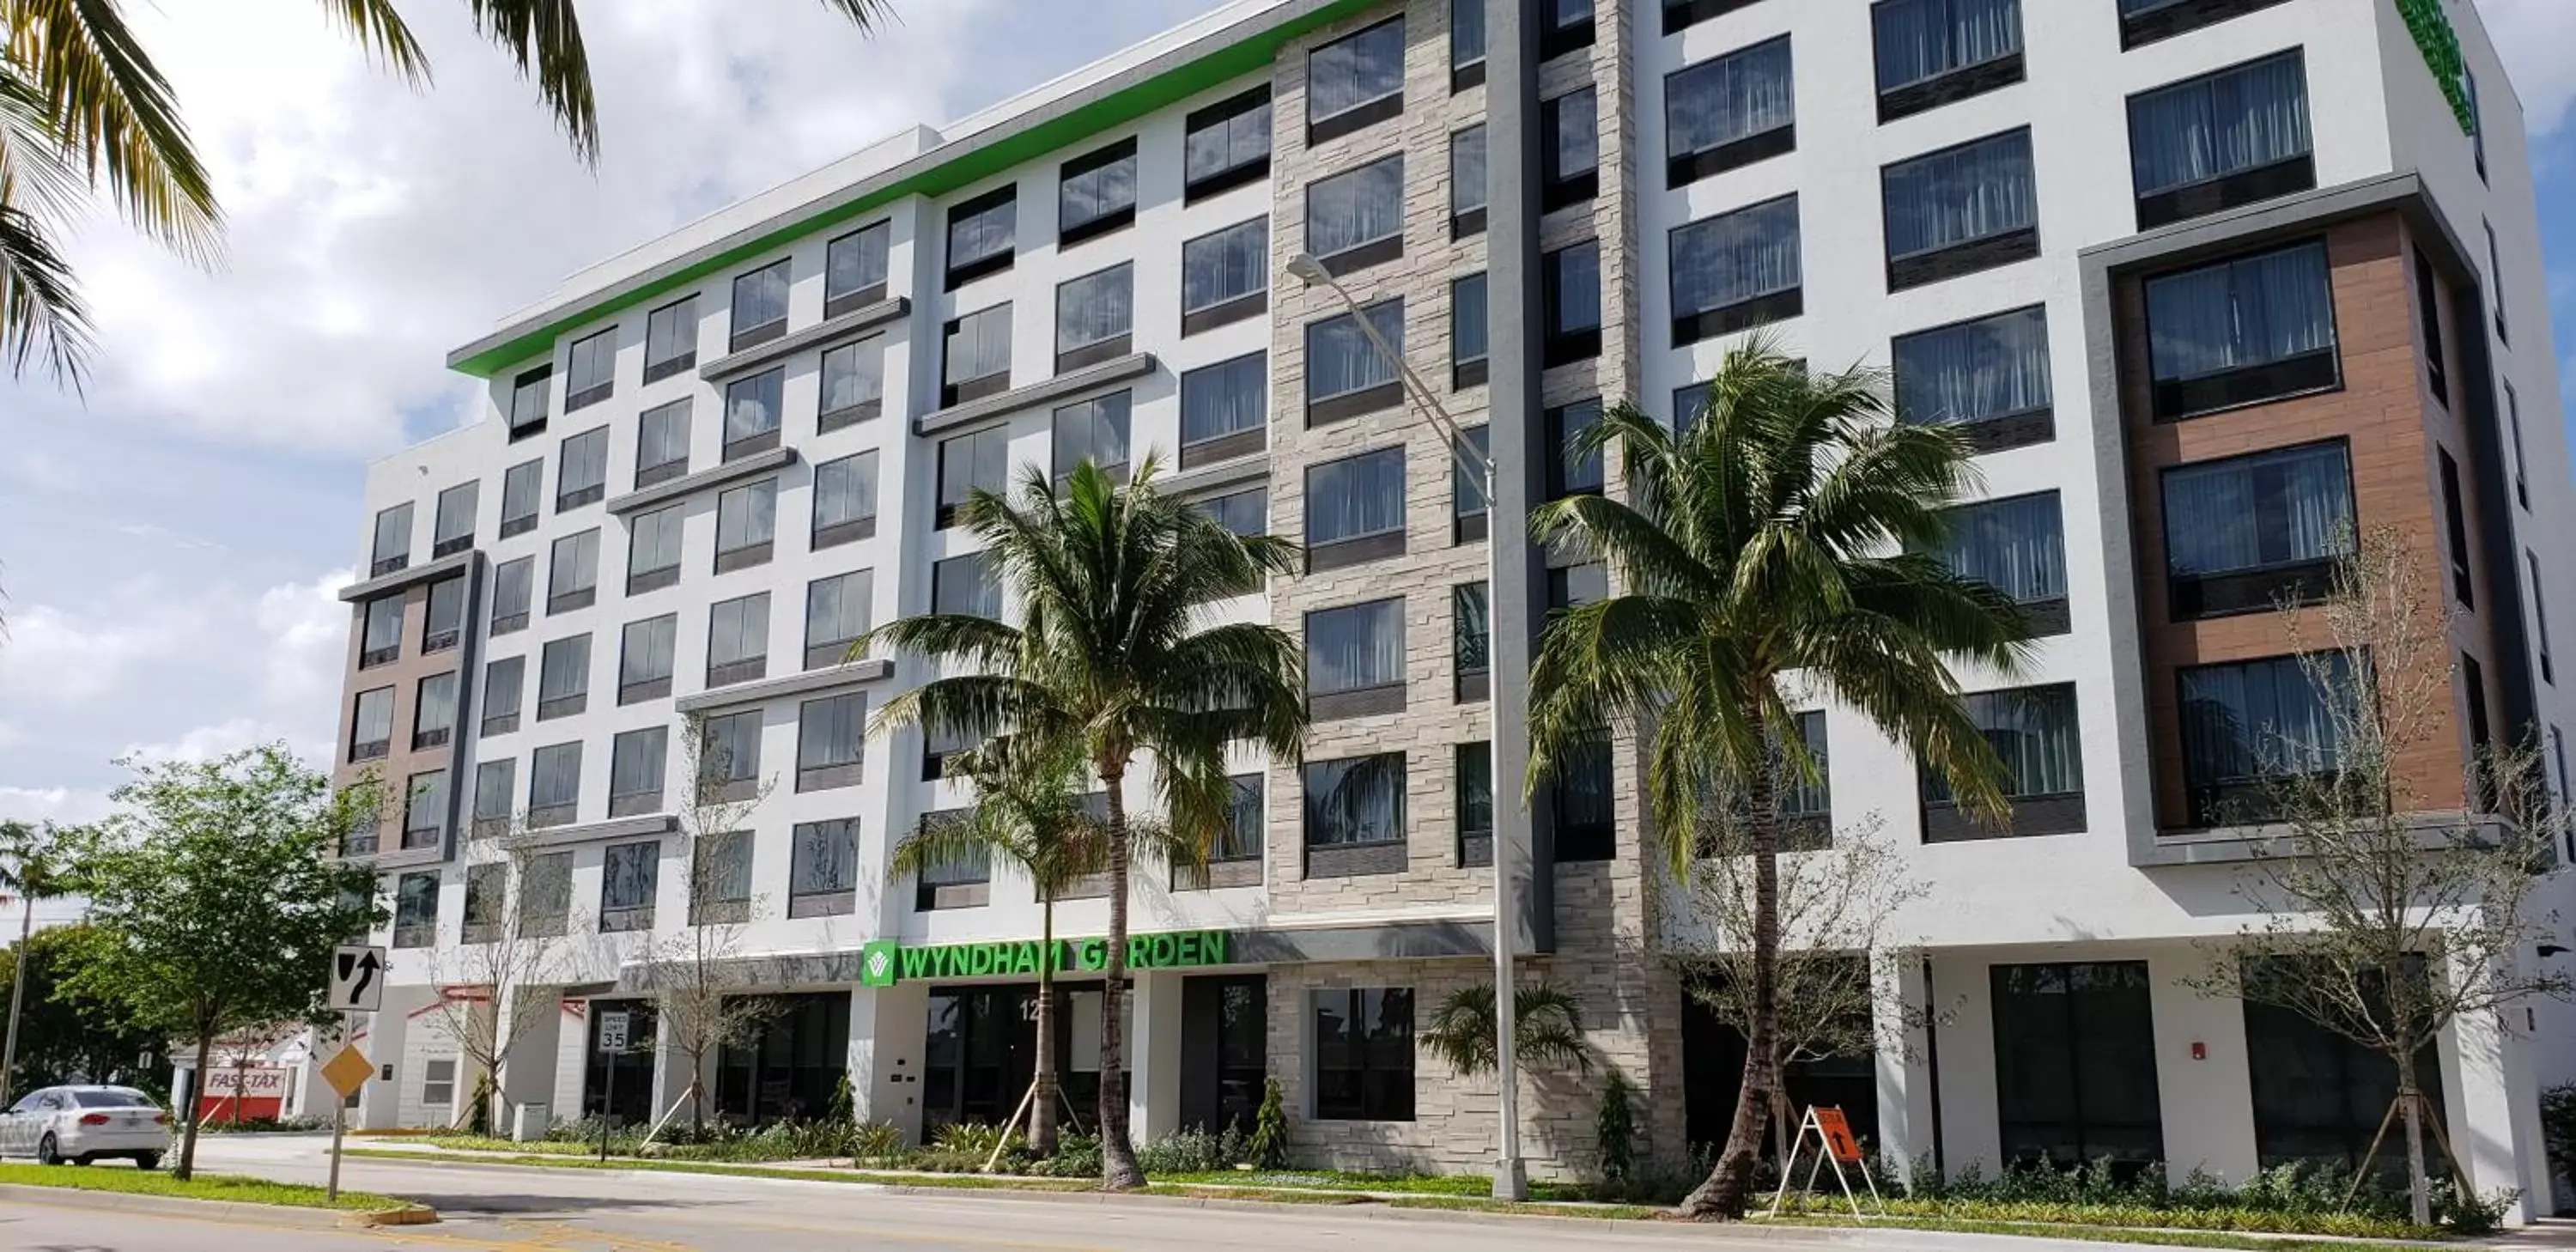 Property Building in Wyndham Garden Ft Lauderdale Airport & Cruise Port